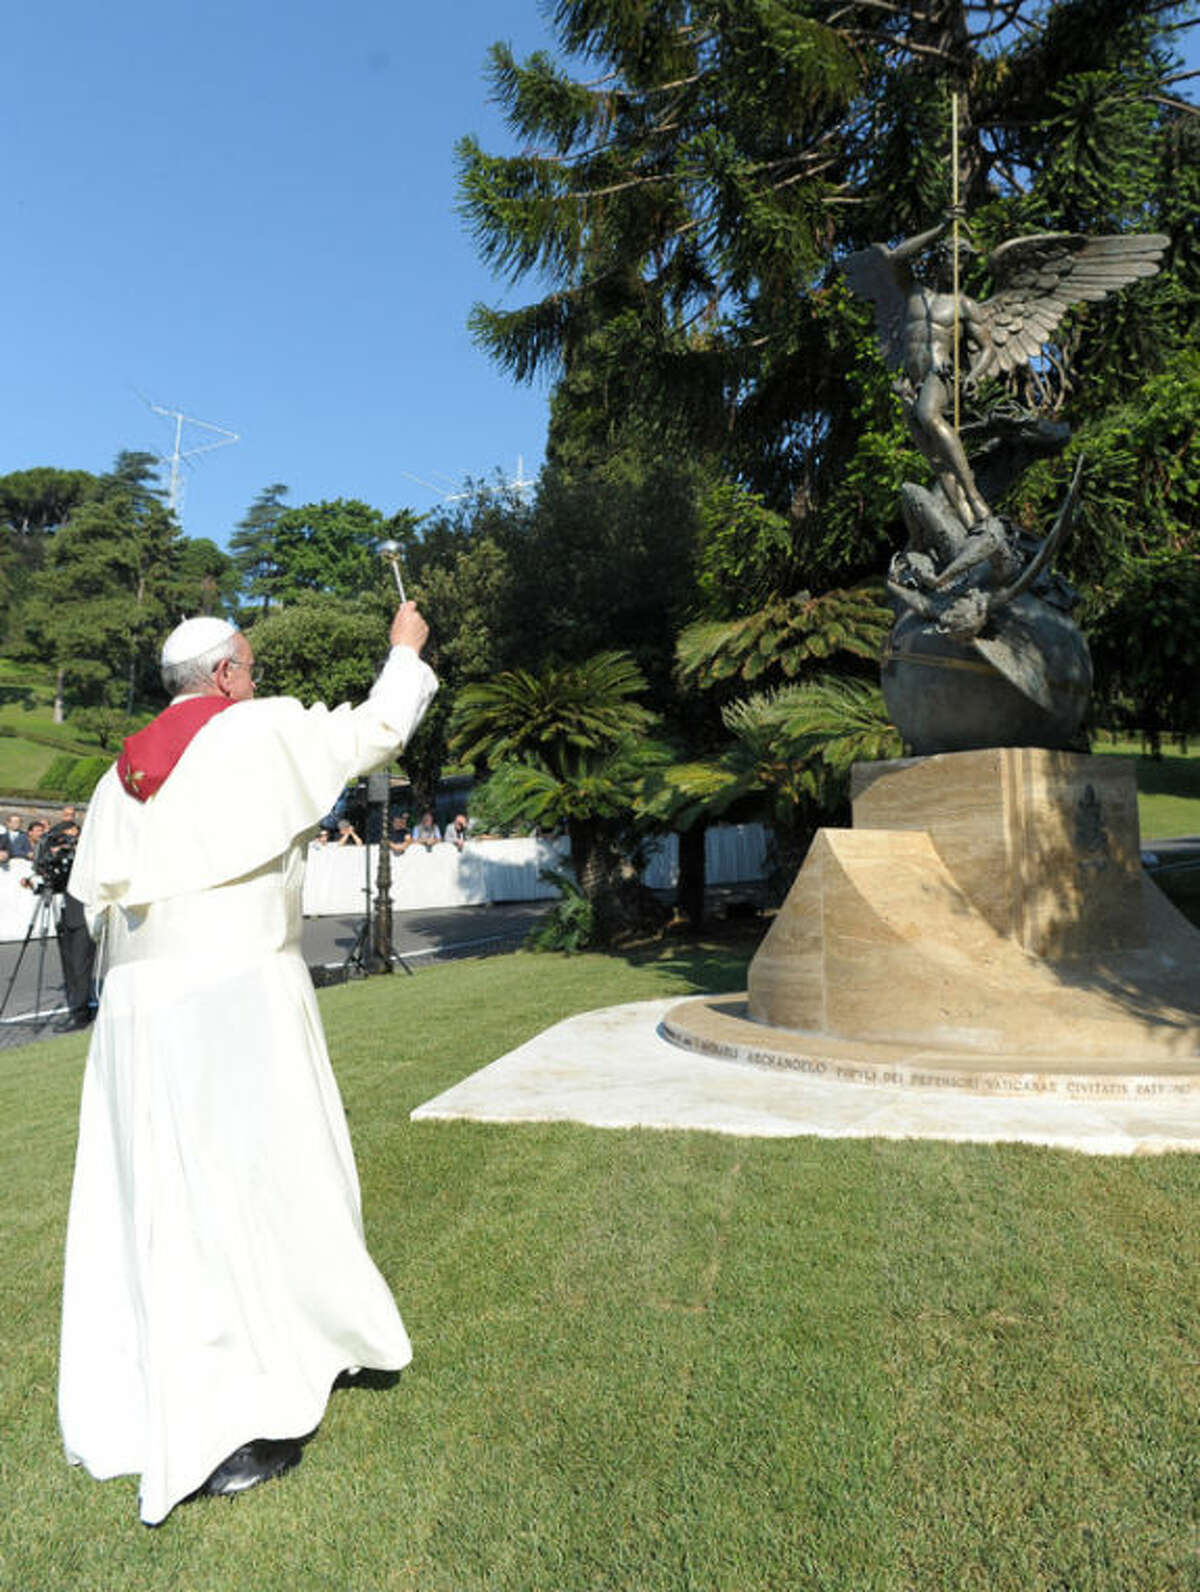 In this photo provided by the Vatican newspaper L'Osservatore Romano Pope Francis blesses the San Michele Arcangelo statue during a ceremony for its unveiling at the Vatican, Friday, July 5, 2013. Francis and Pope emeritus Benedict XVI were together Friday morning for the inauguration of the new monument inside the Vatican gardens - the first time they have been seen together since May 2, when Francis welcomed Benedict back to the Vatican after his initial retirement getaway. Pope Francis issued his first encyclical Friday, a meditation on faith that is unique because it was written with Benedict XVI. Benedict's hand is evident throughout much of the first three chapters of "The Light of Faith," with his theological style, concerns and reference points clear. (AP Photo/L'Osservatore Romano, ho)